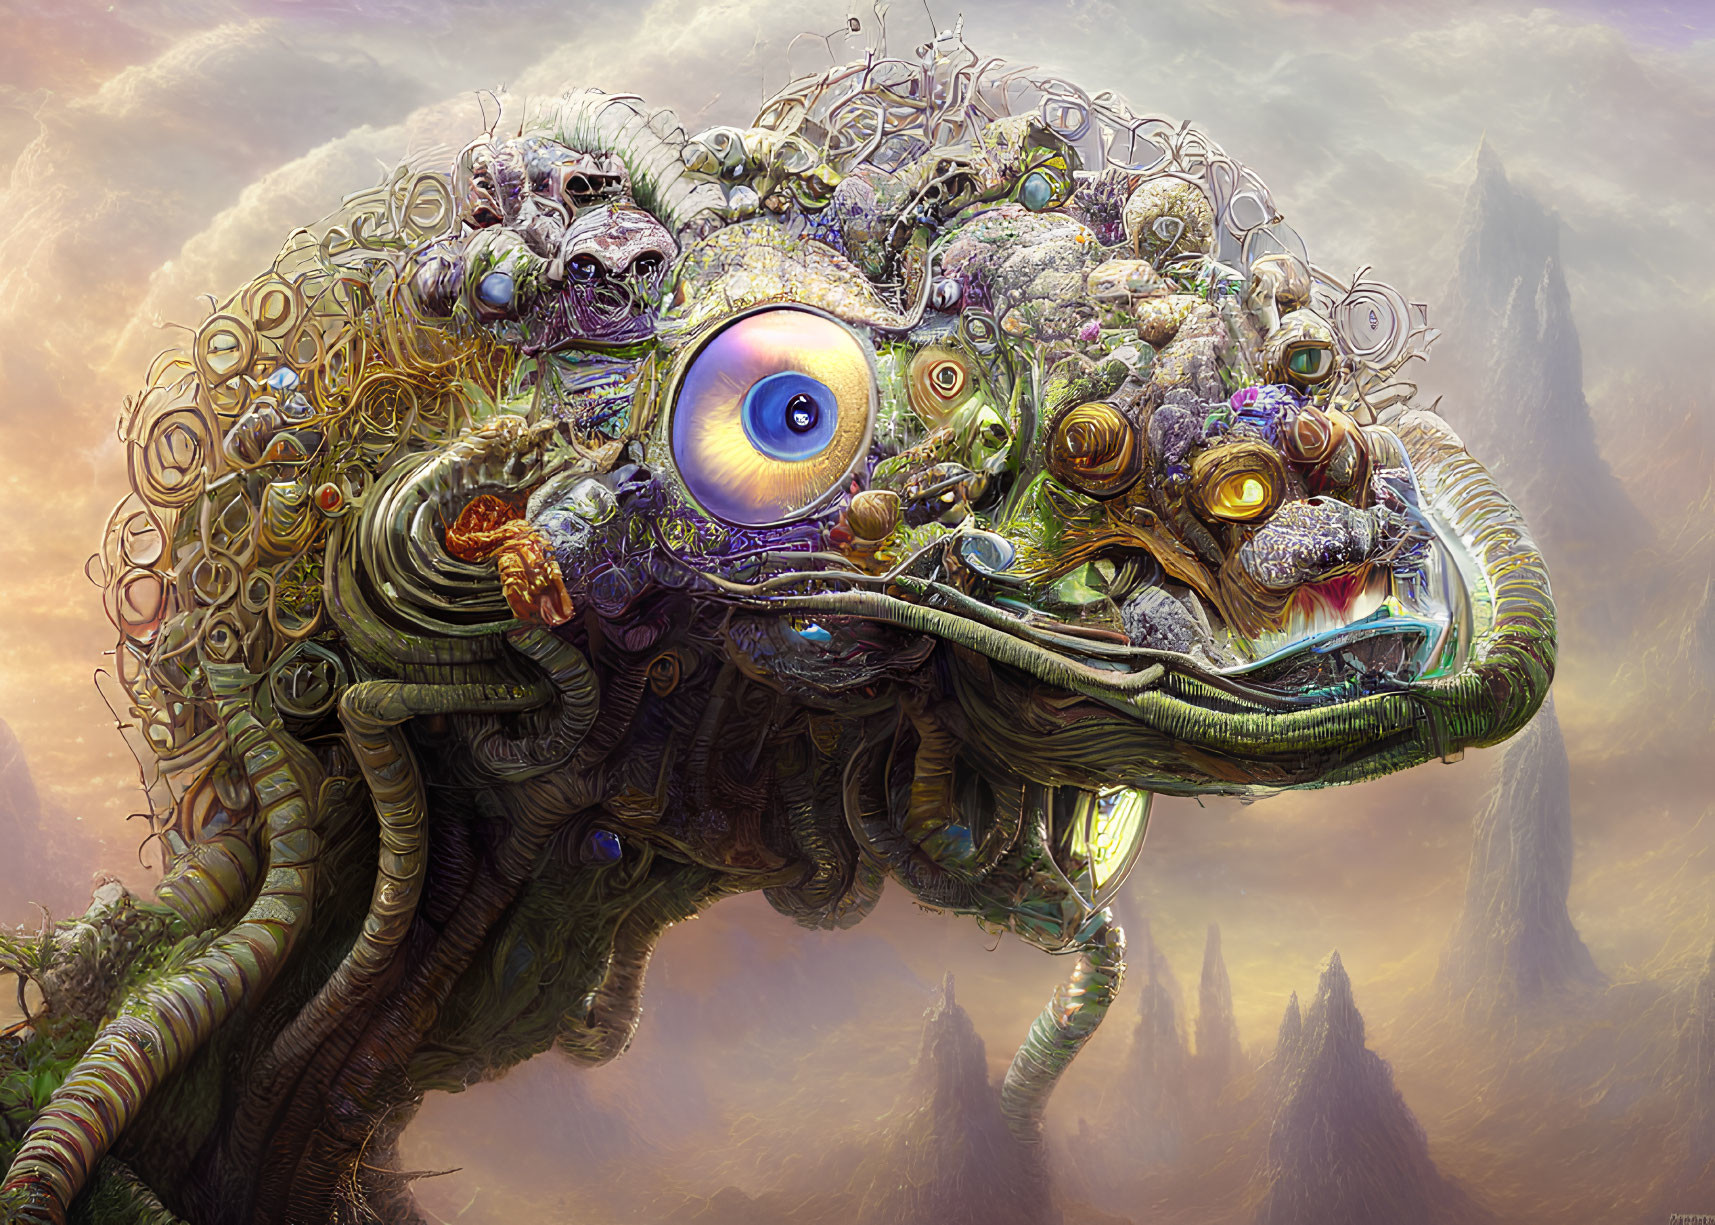 Fantastical creature with large eye and serpentine extensions in misty mountain setting